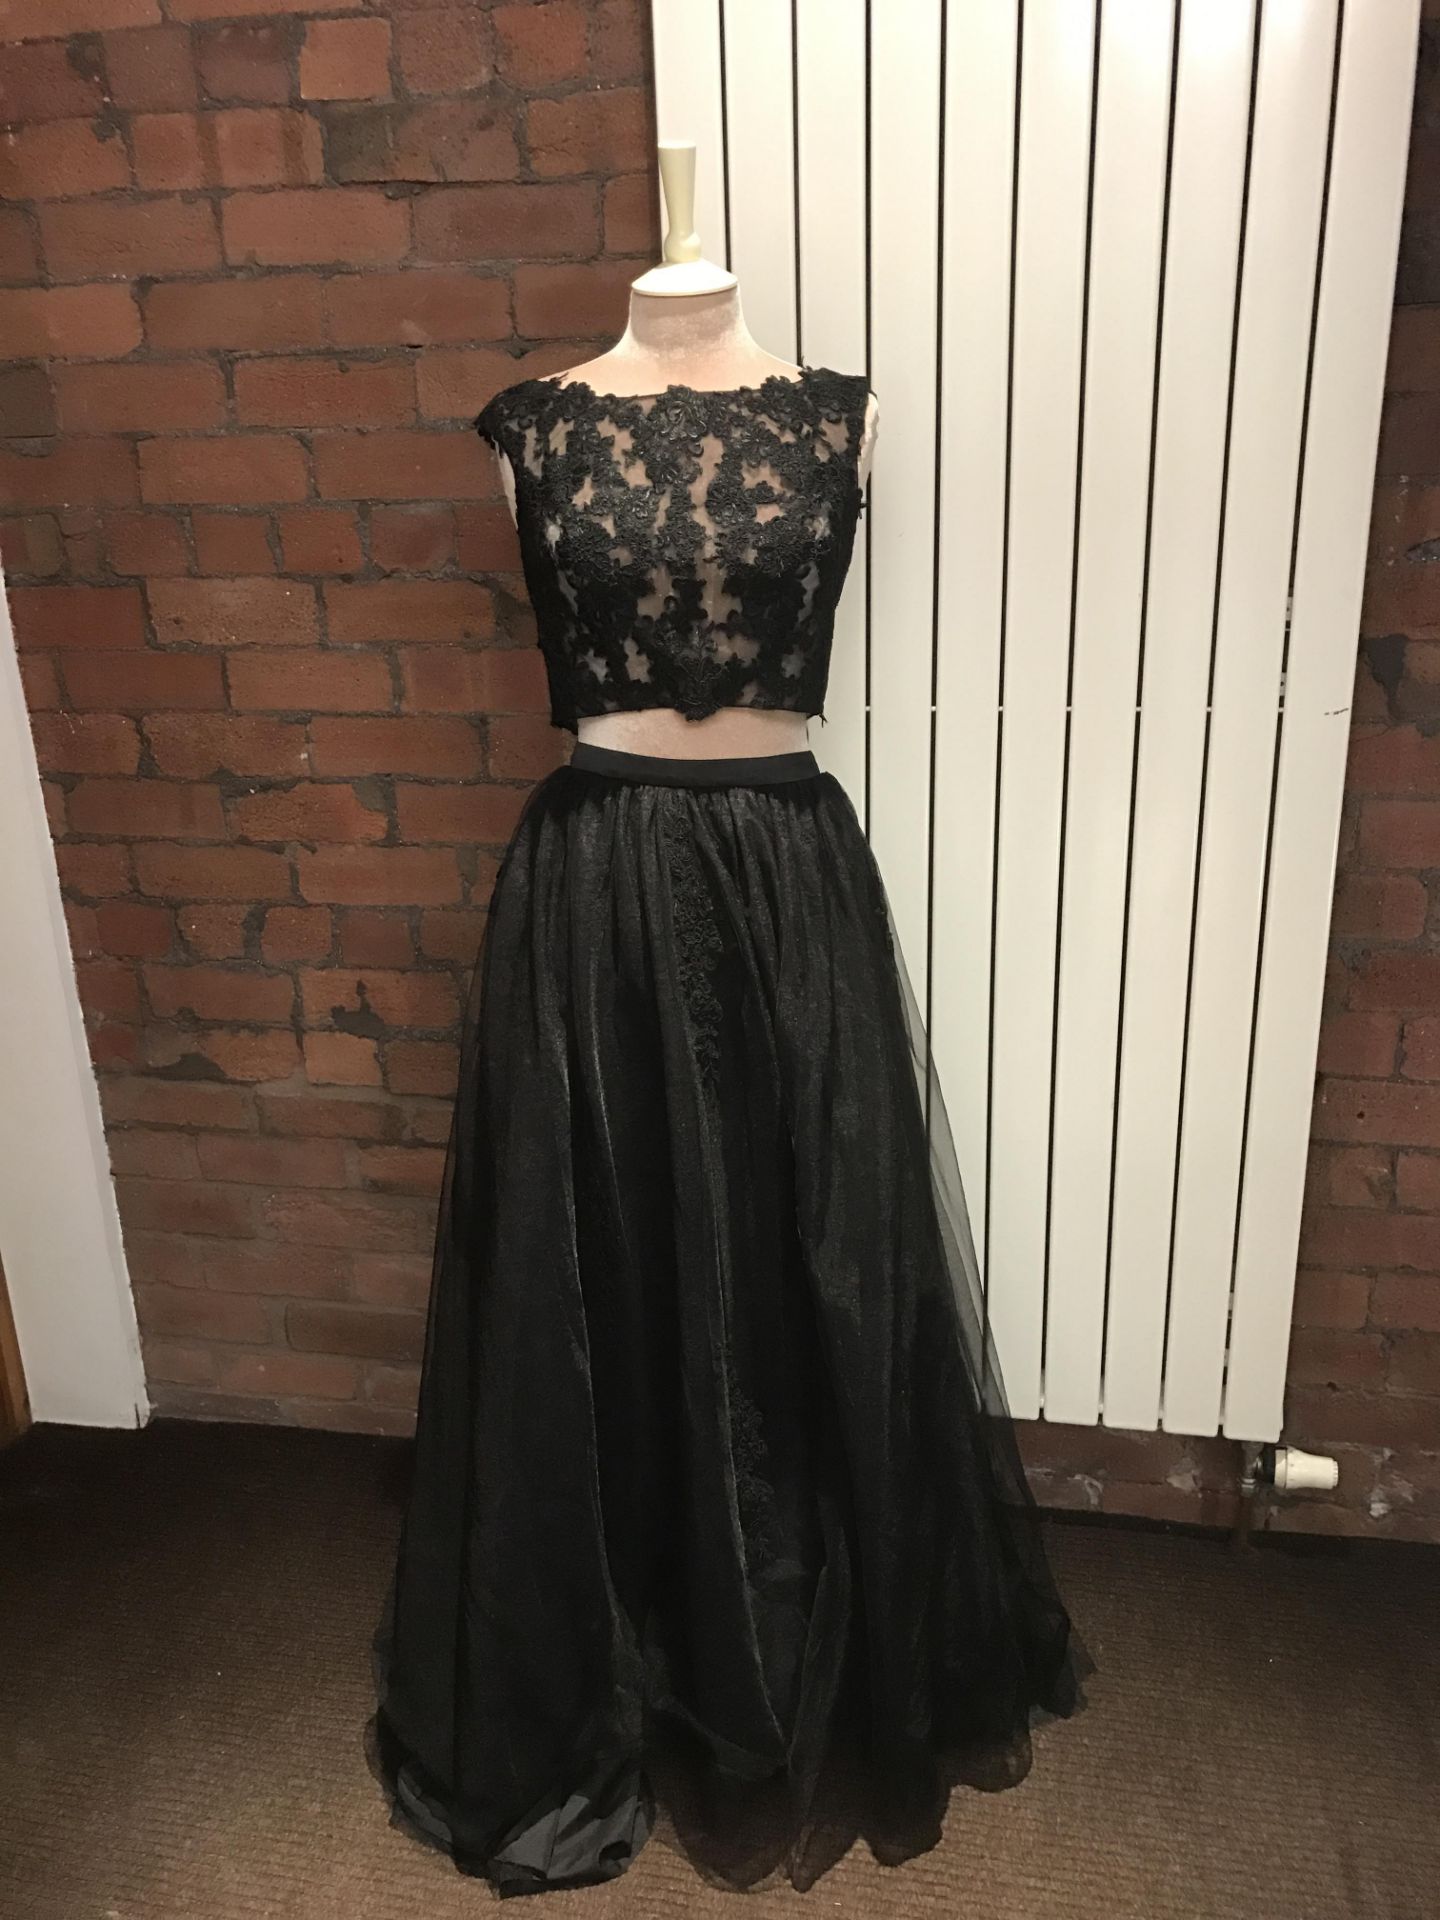 New Full Length Vintage Inspired Lace with Fishtail Bridesmaid/Occasional Skirt in Black size 10.